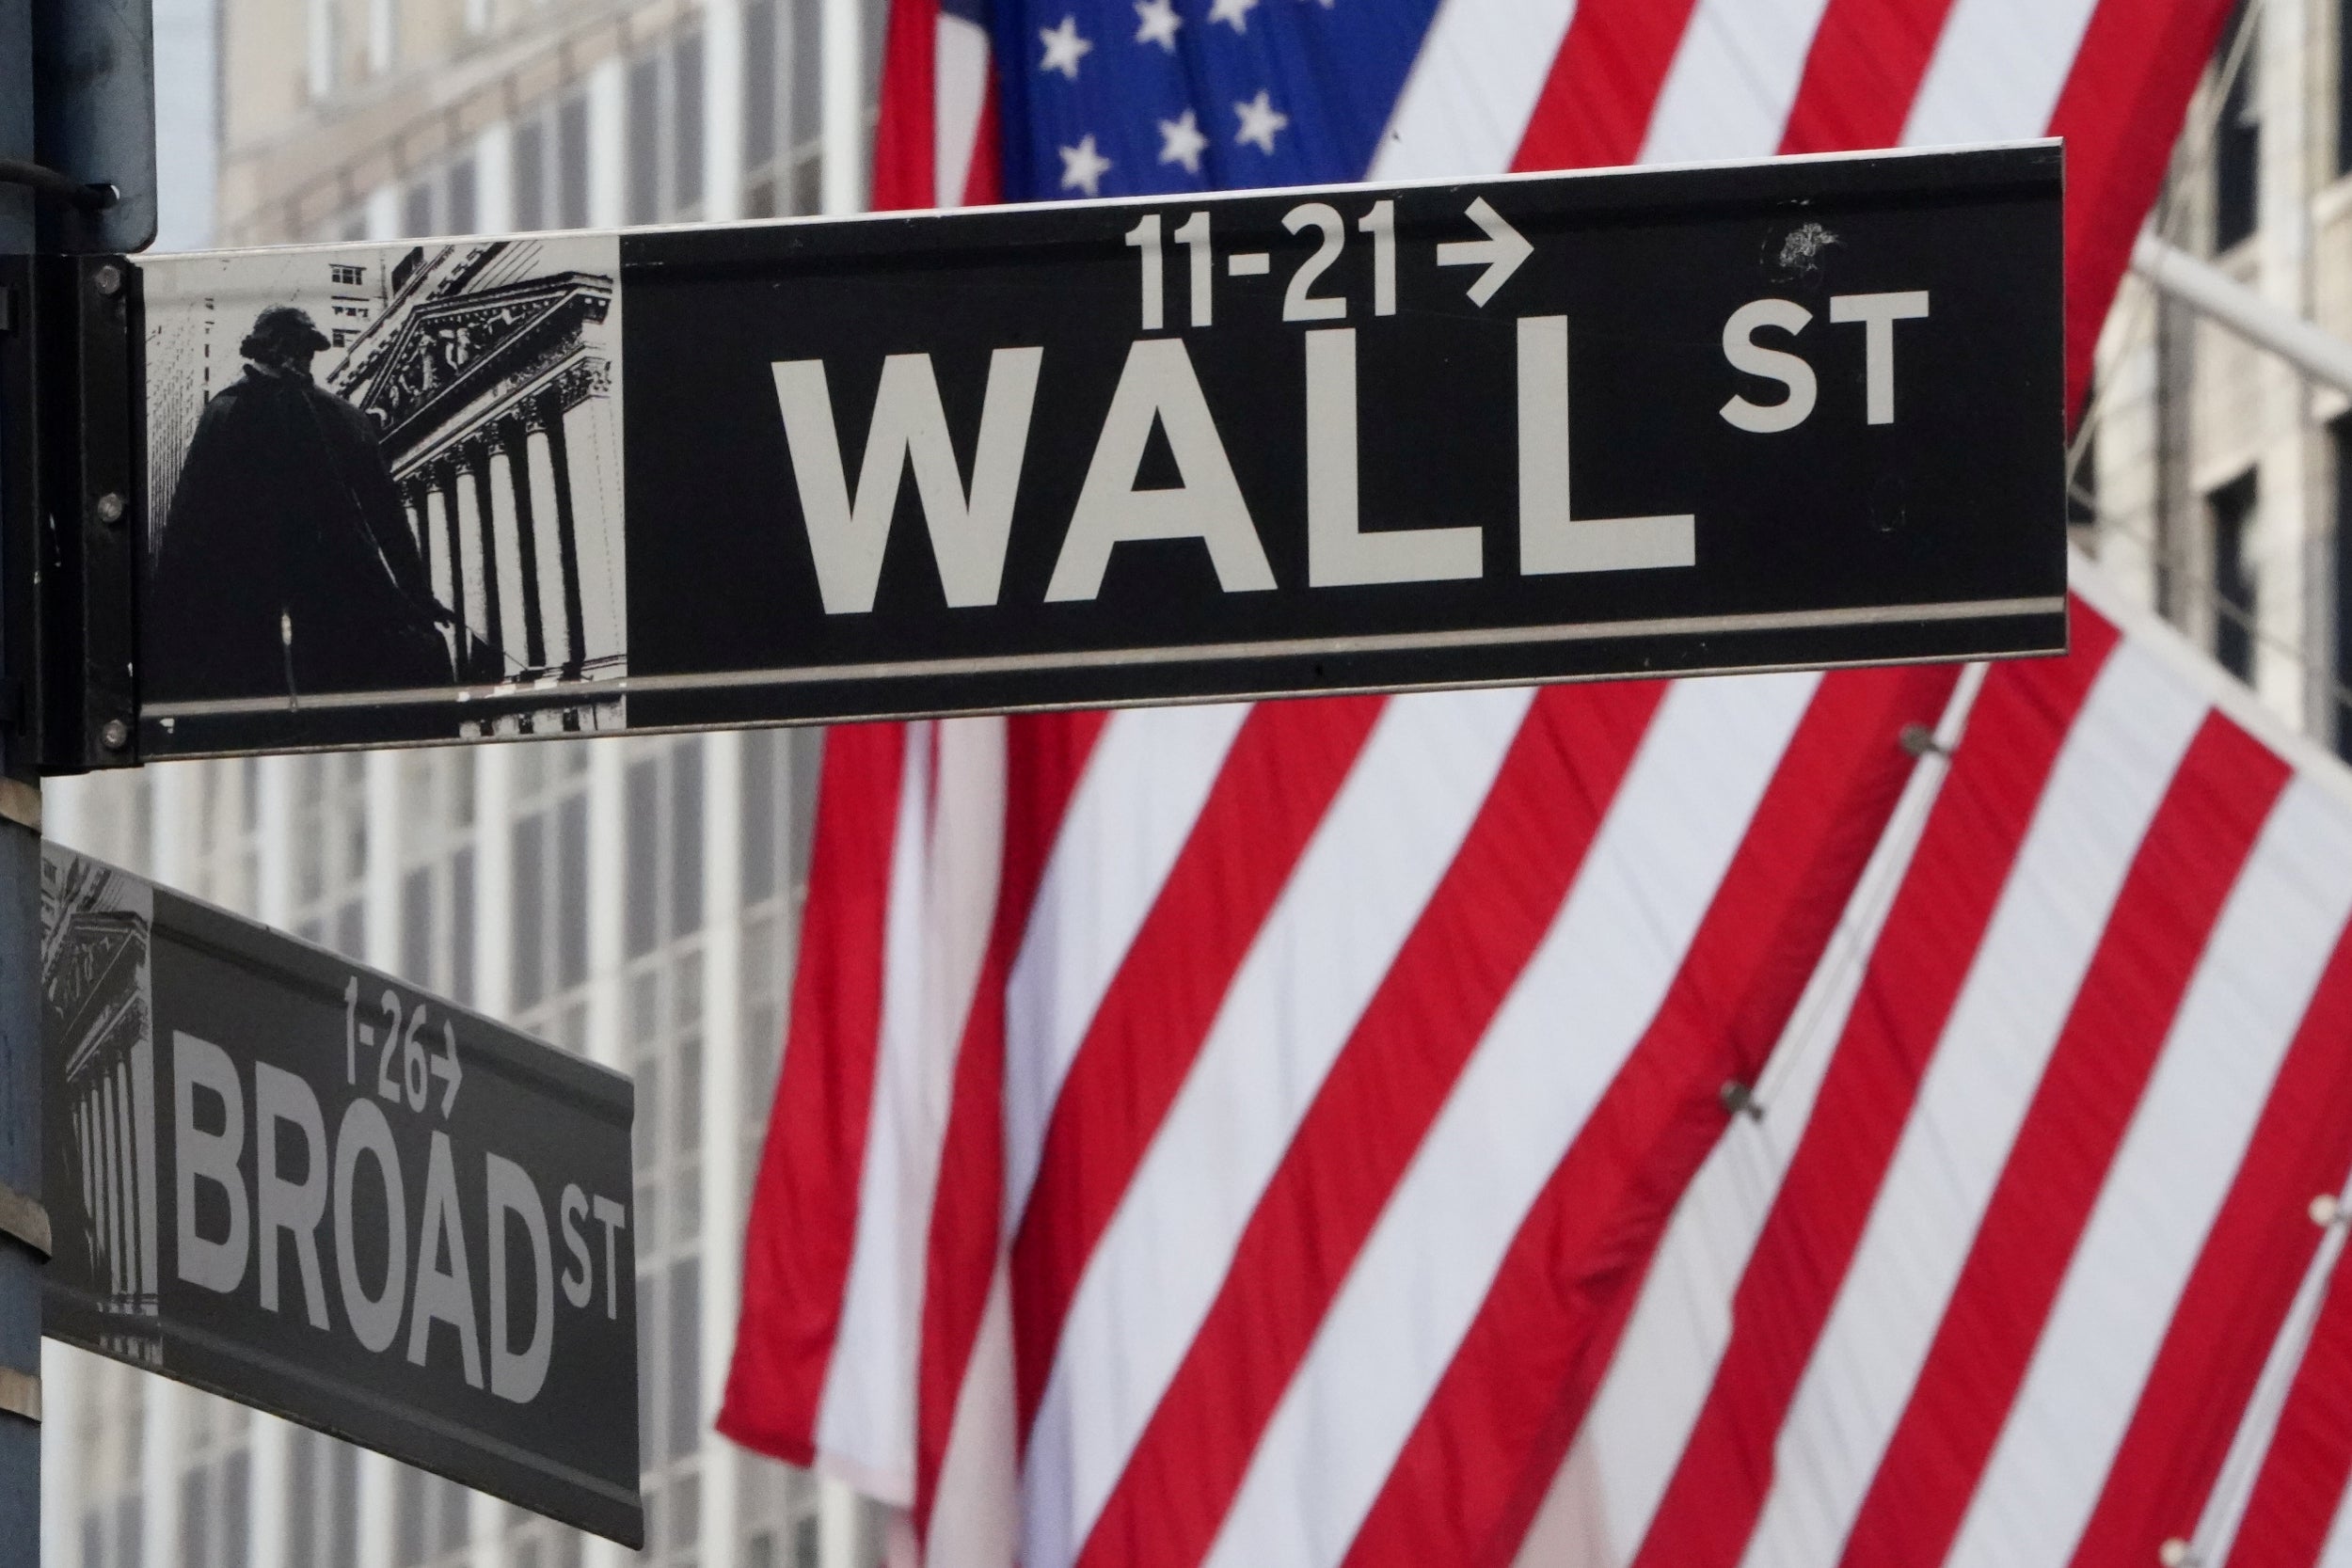 Wall Street has recovered much of the losses from the crash in March